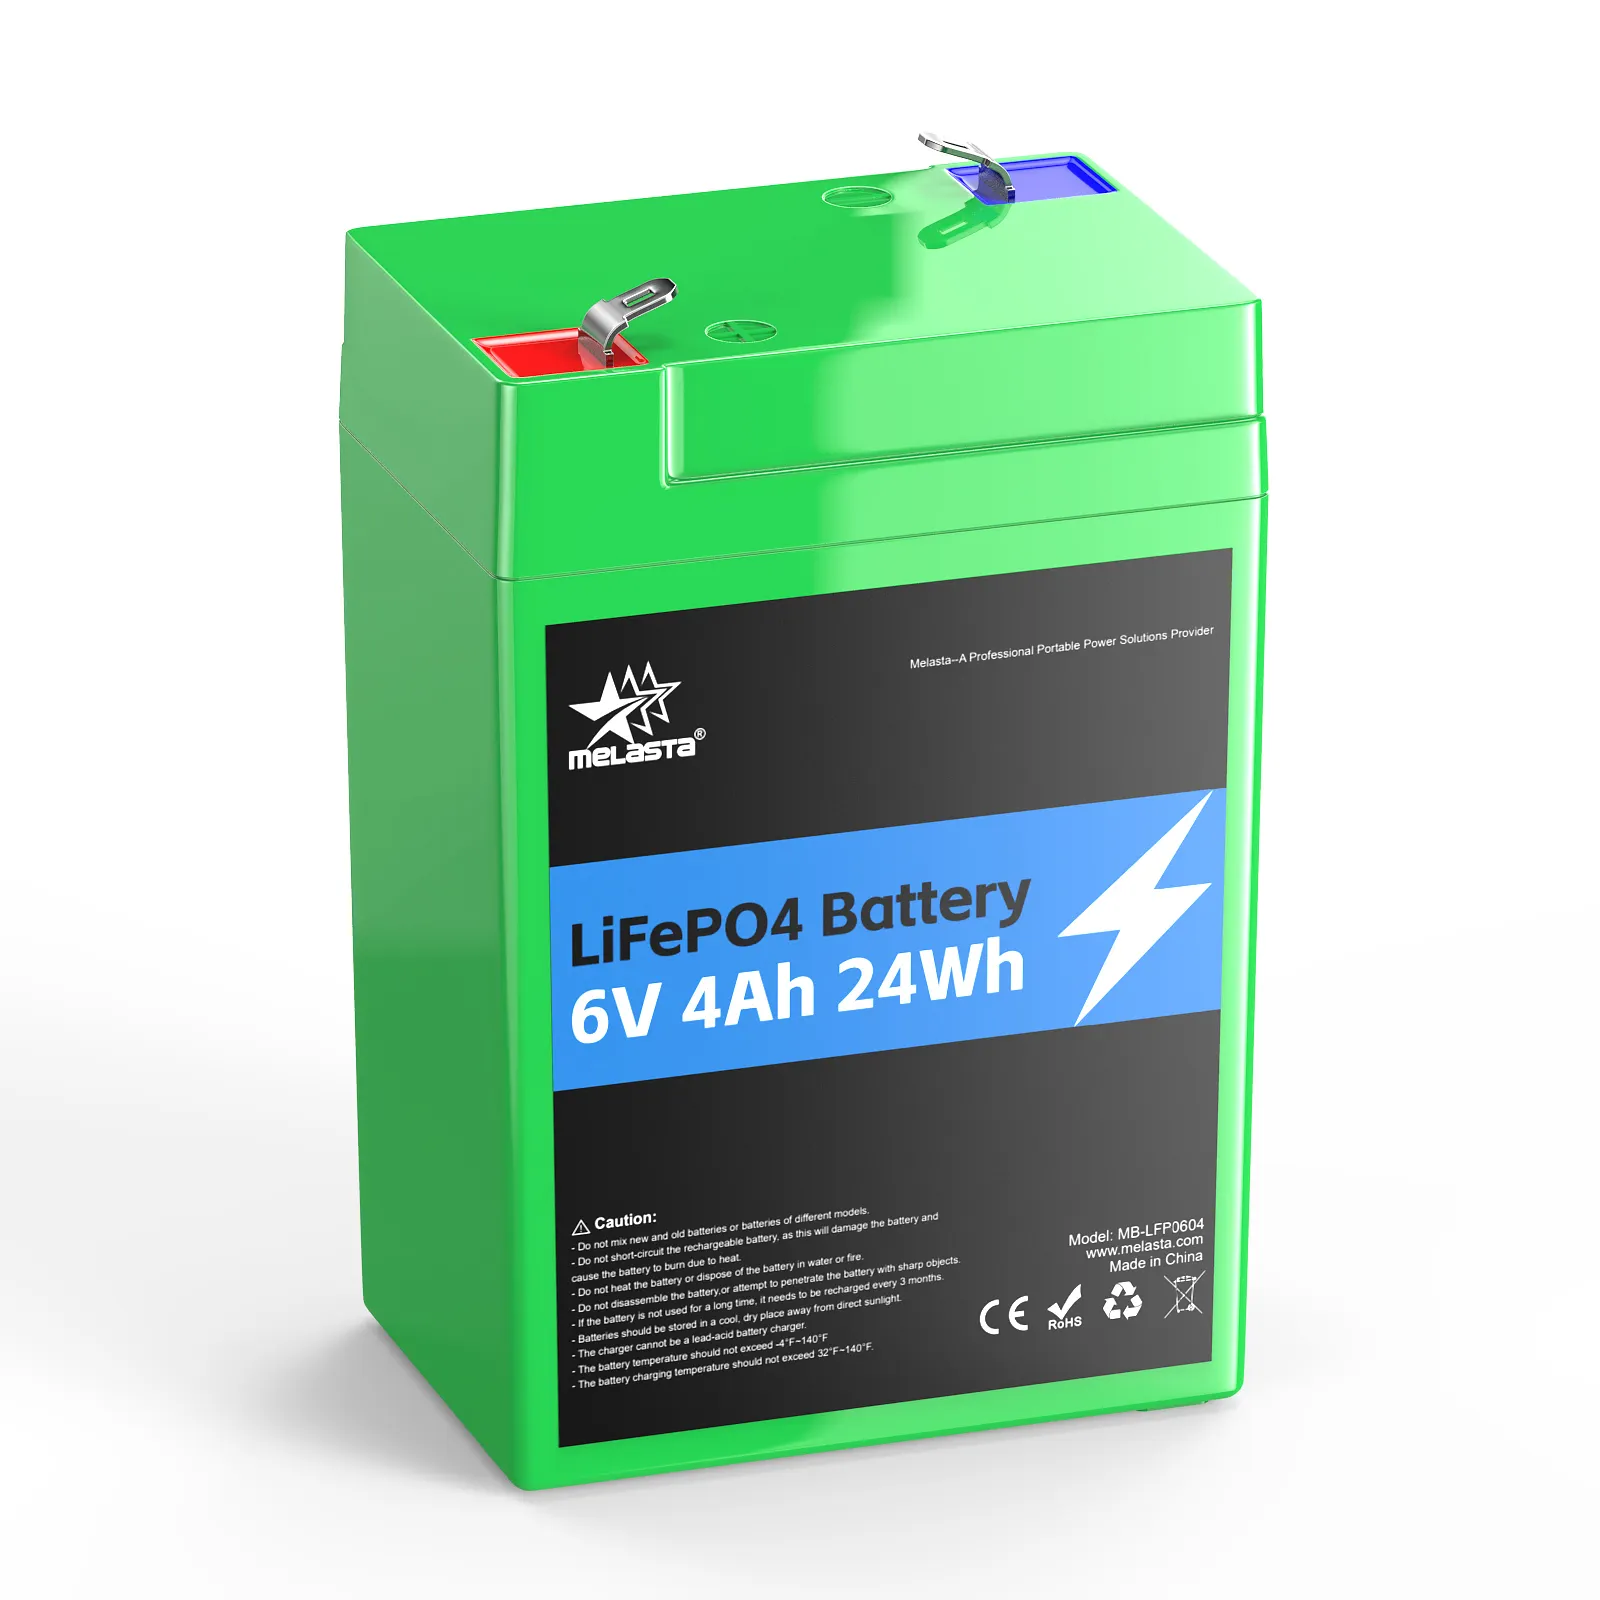 Deep Cycle 6v 4ah Battery Lithium Battery Pack For Rv Camper Marine Sailing Boat